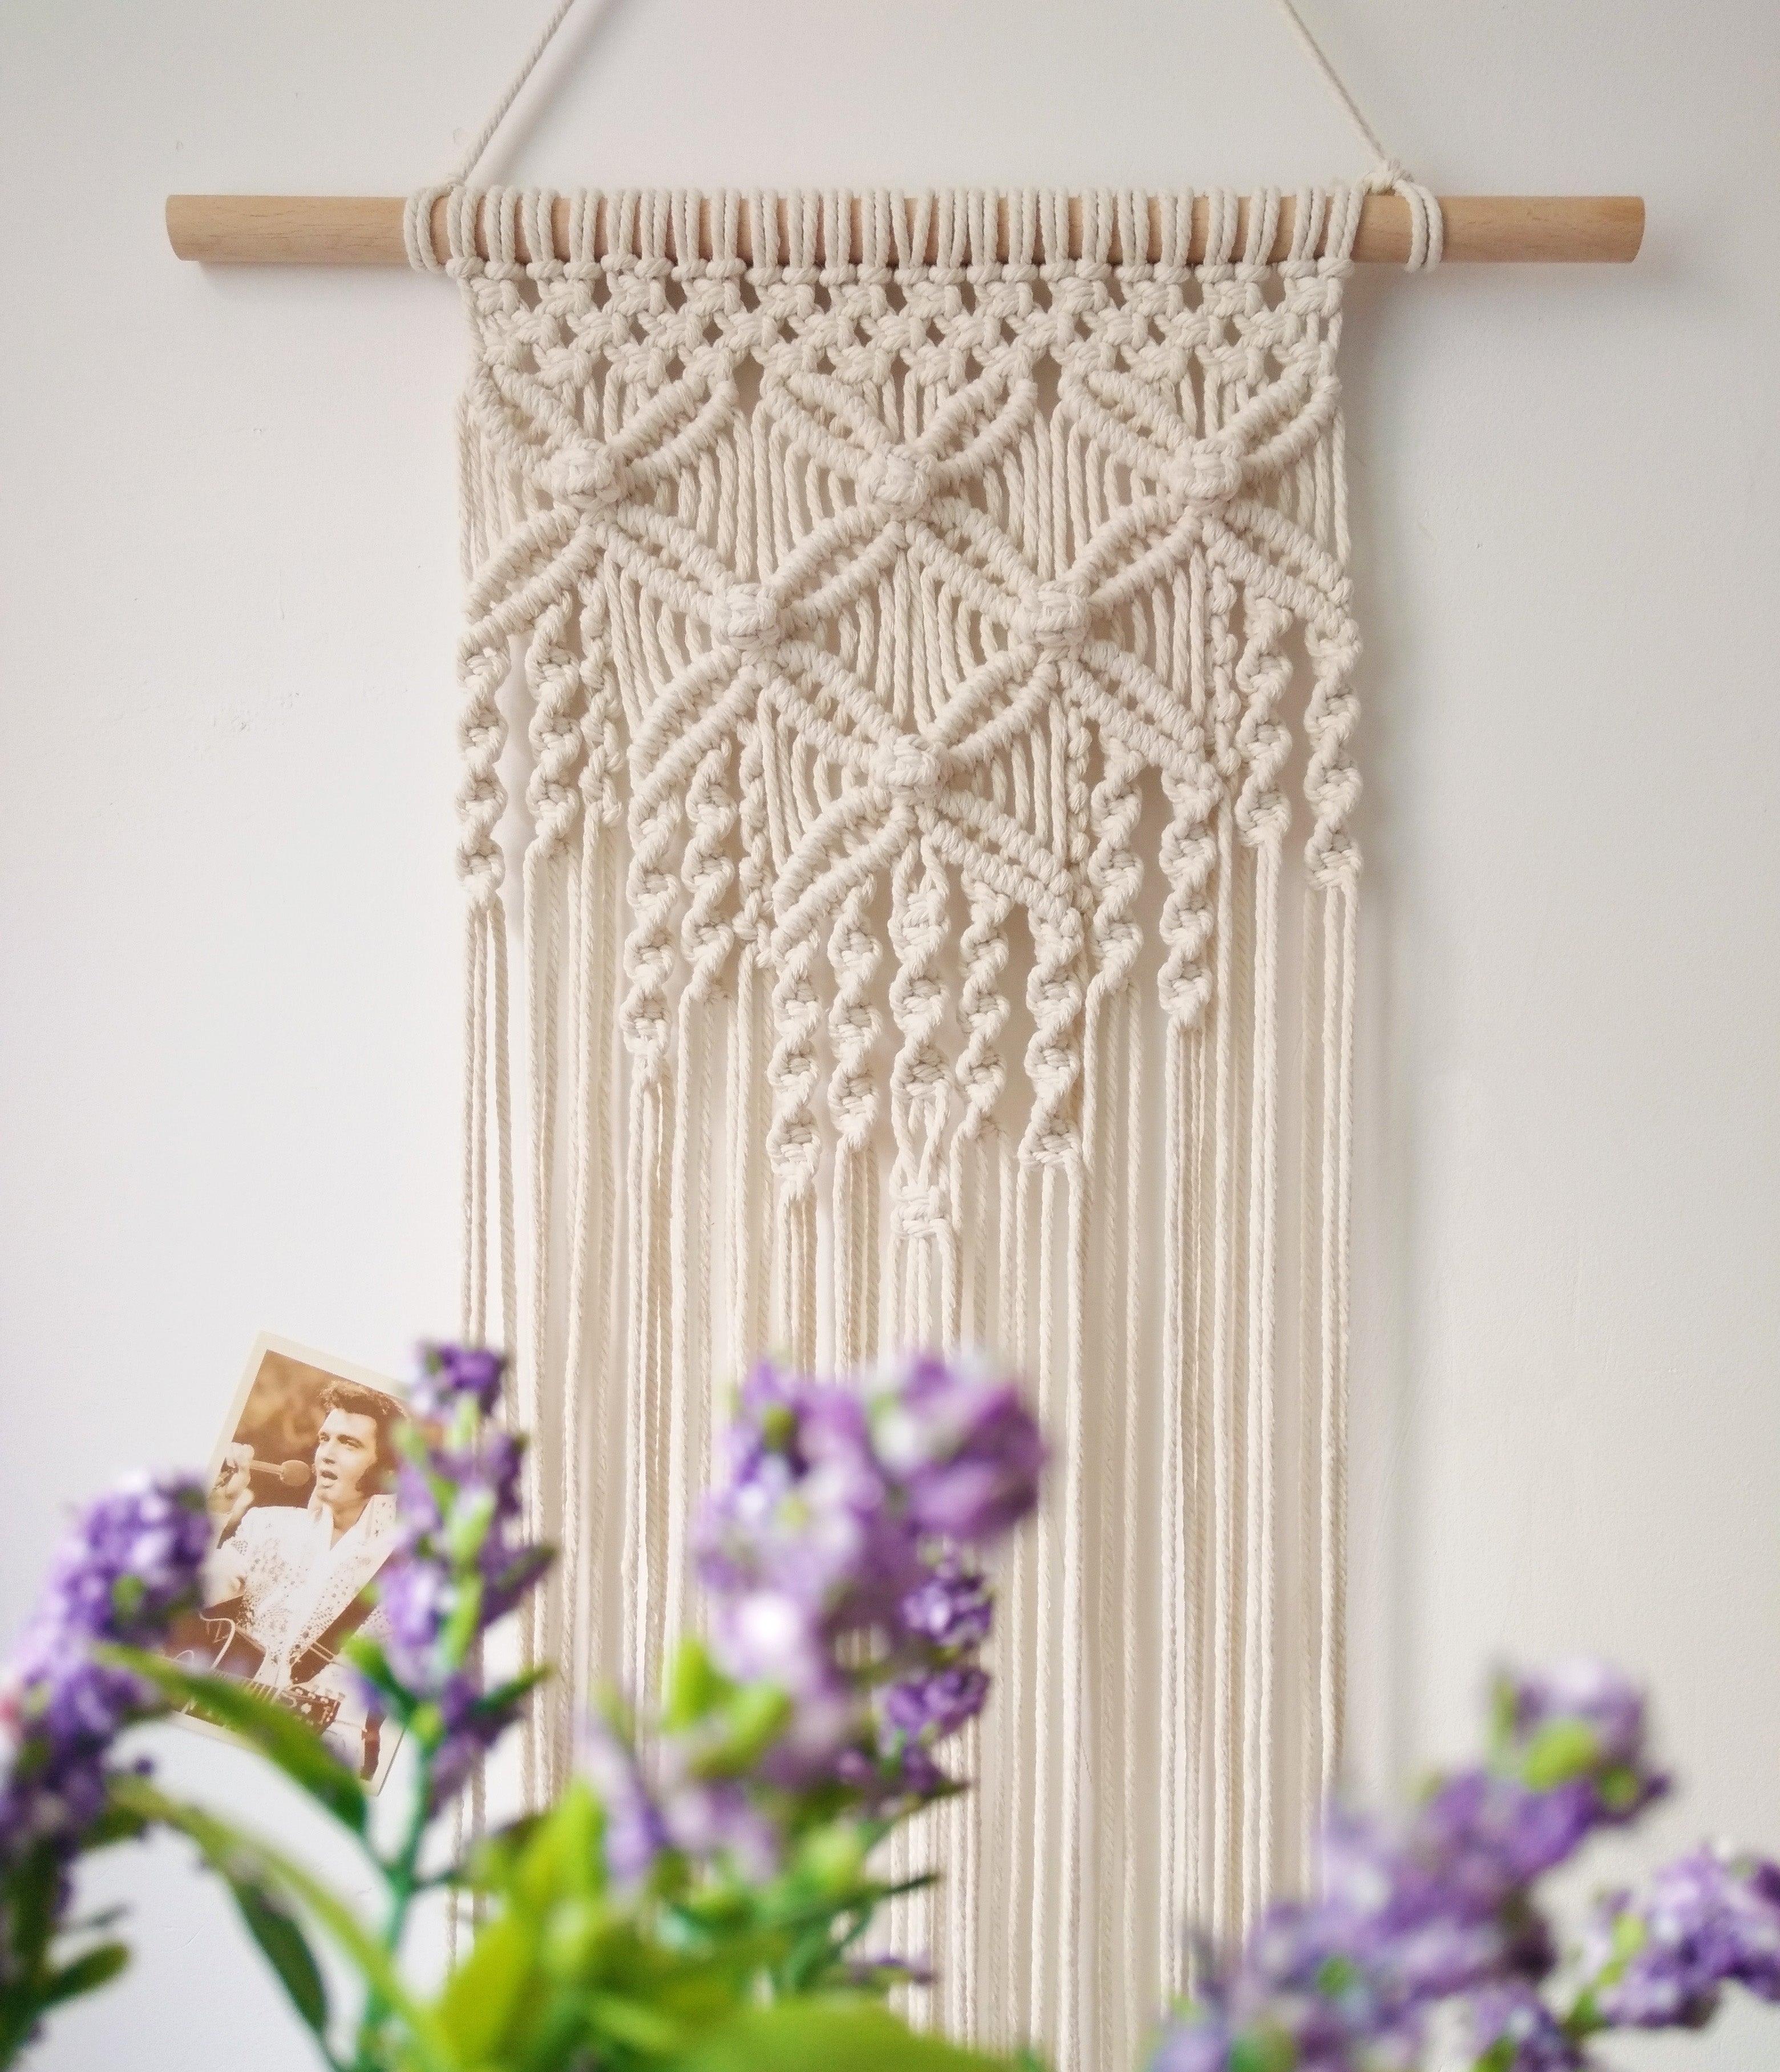 Macrame Wall Hanging Tapestry Boho Macrame Tapestry HandWoven Home ...